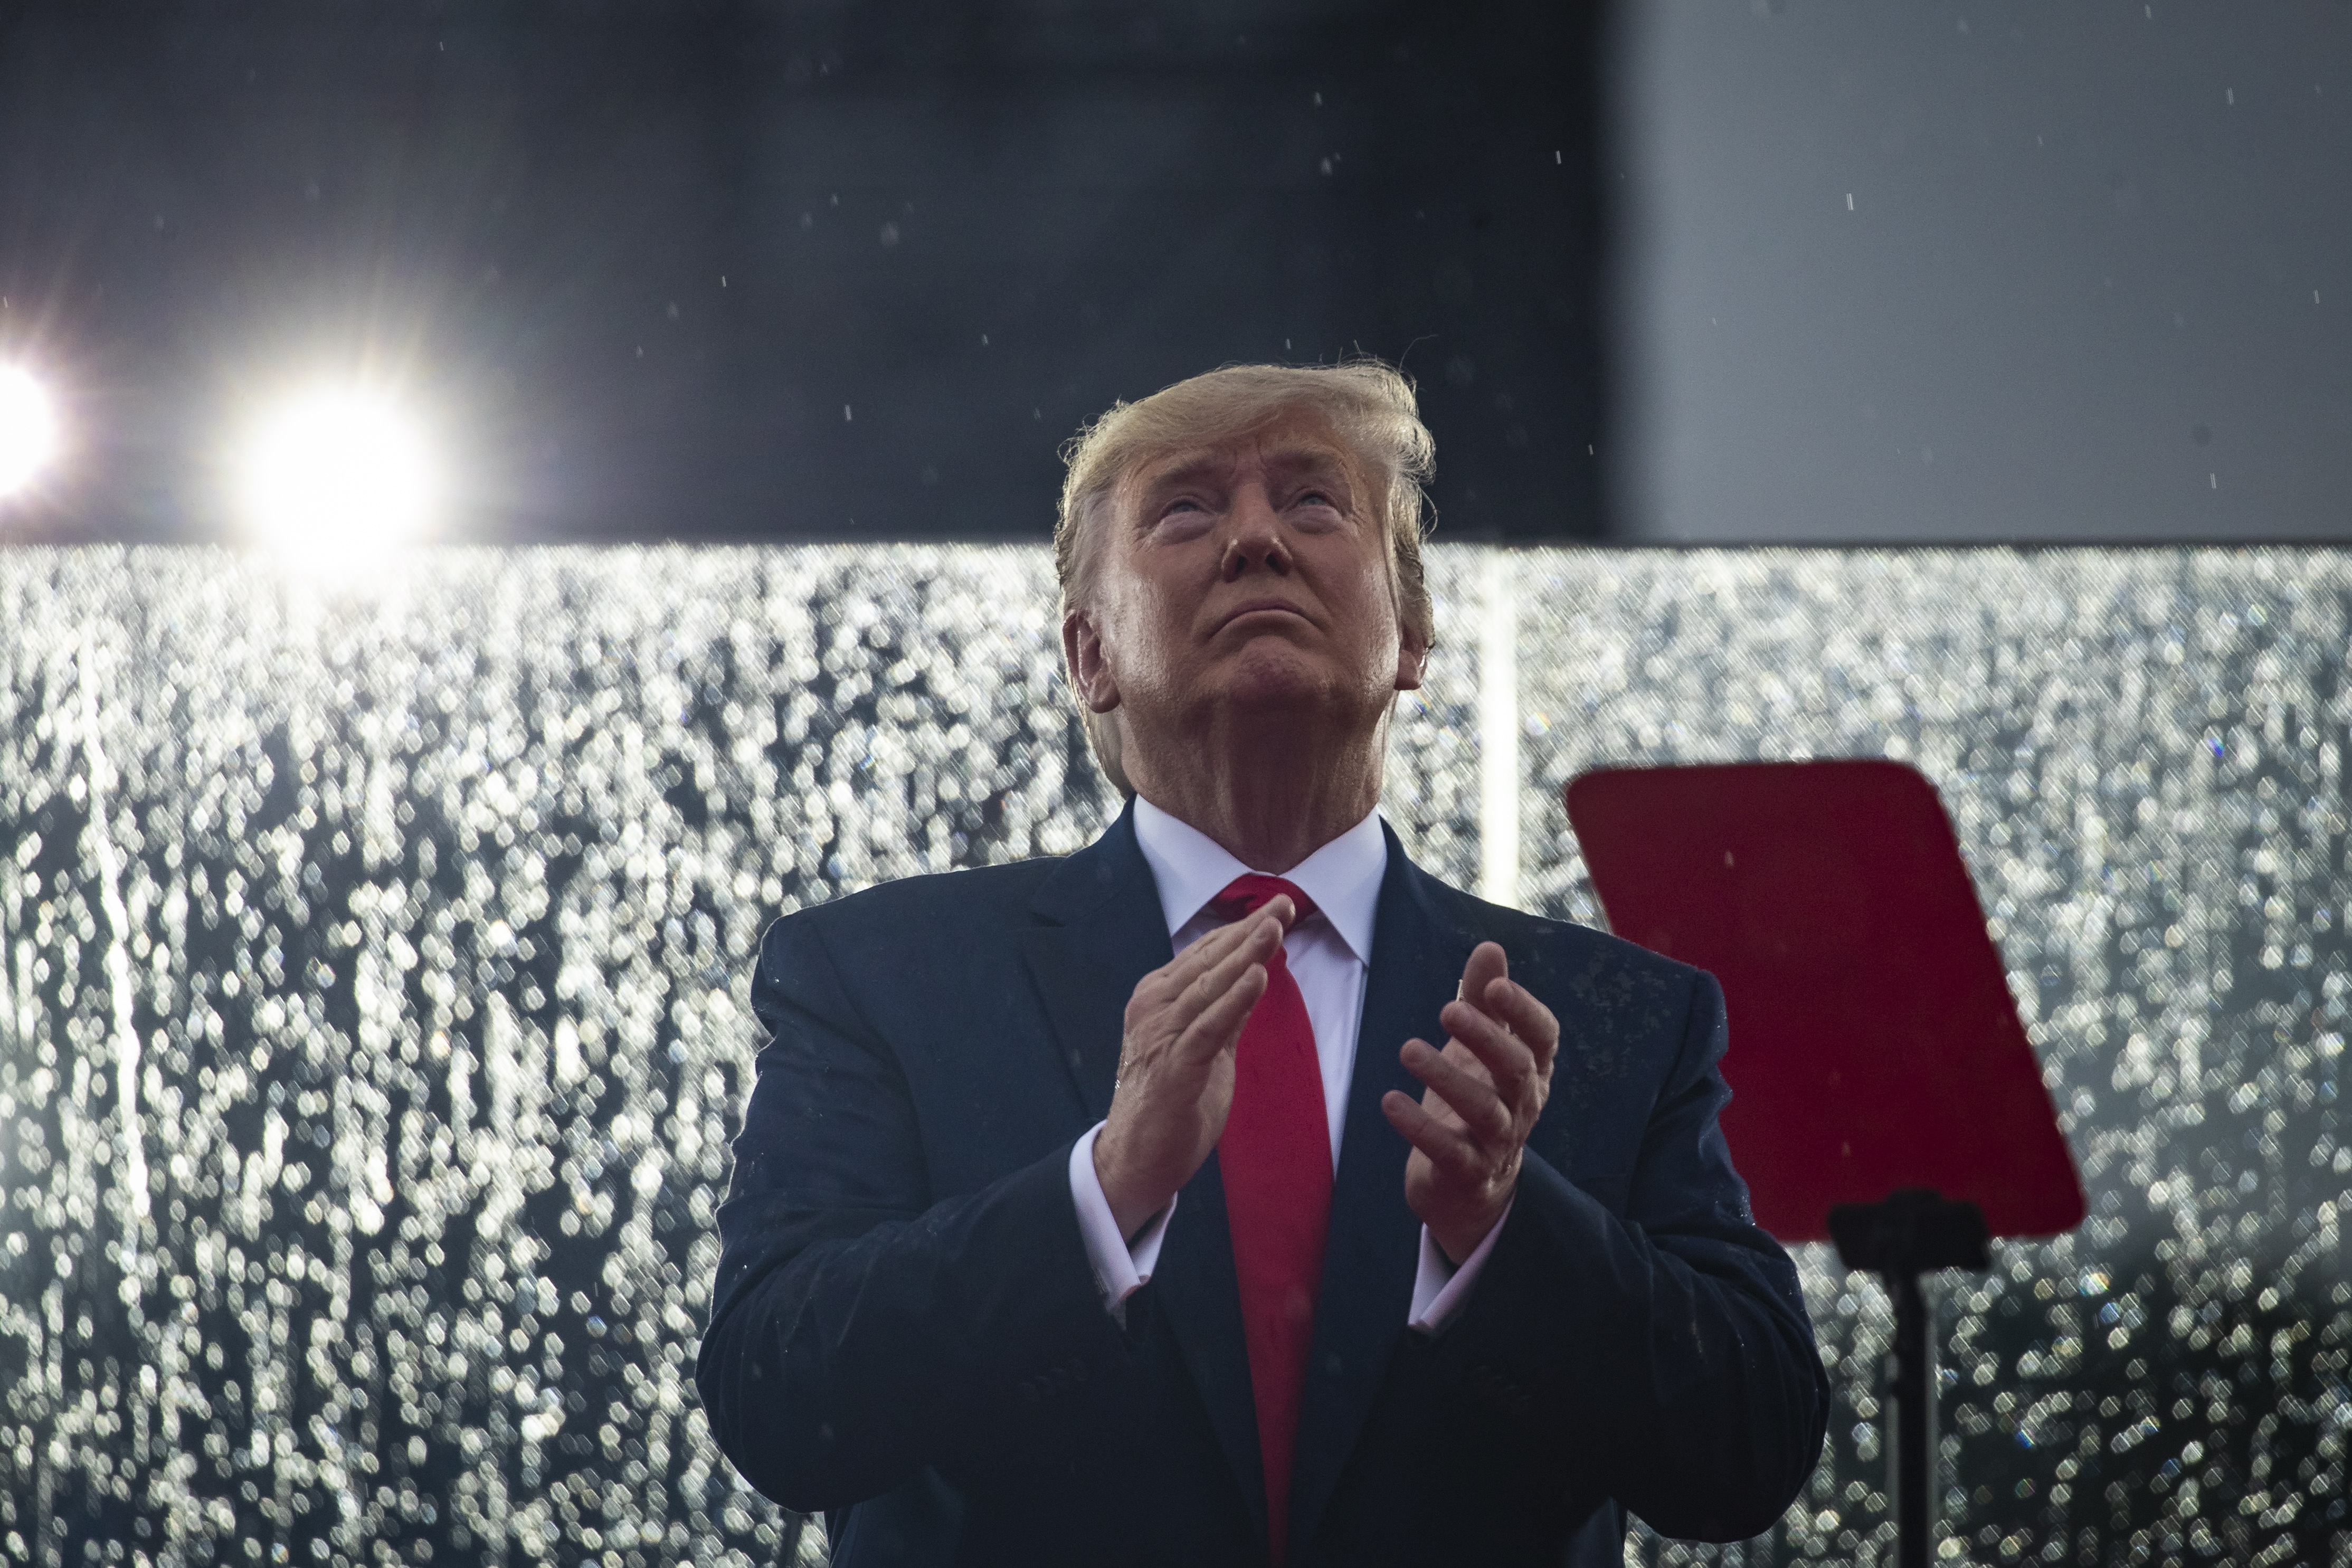 epa07695984 US President Donald Trump attends the Fourth of July celebration event in Washington, DC, USA, 04 July 2019. The 'Salute to America' Fourth of July activities include remarks by US President Donald J. Trump, a parade, military flyovers and fireworks.  EPA/AL DRAGO / POOL